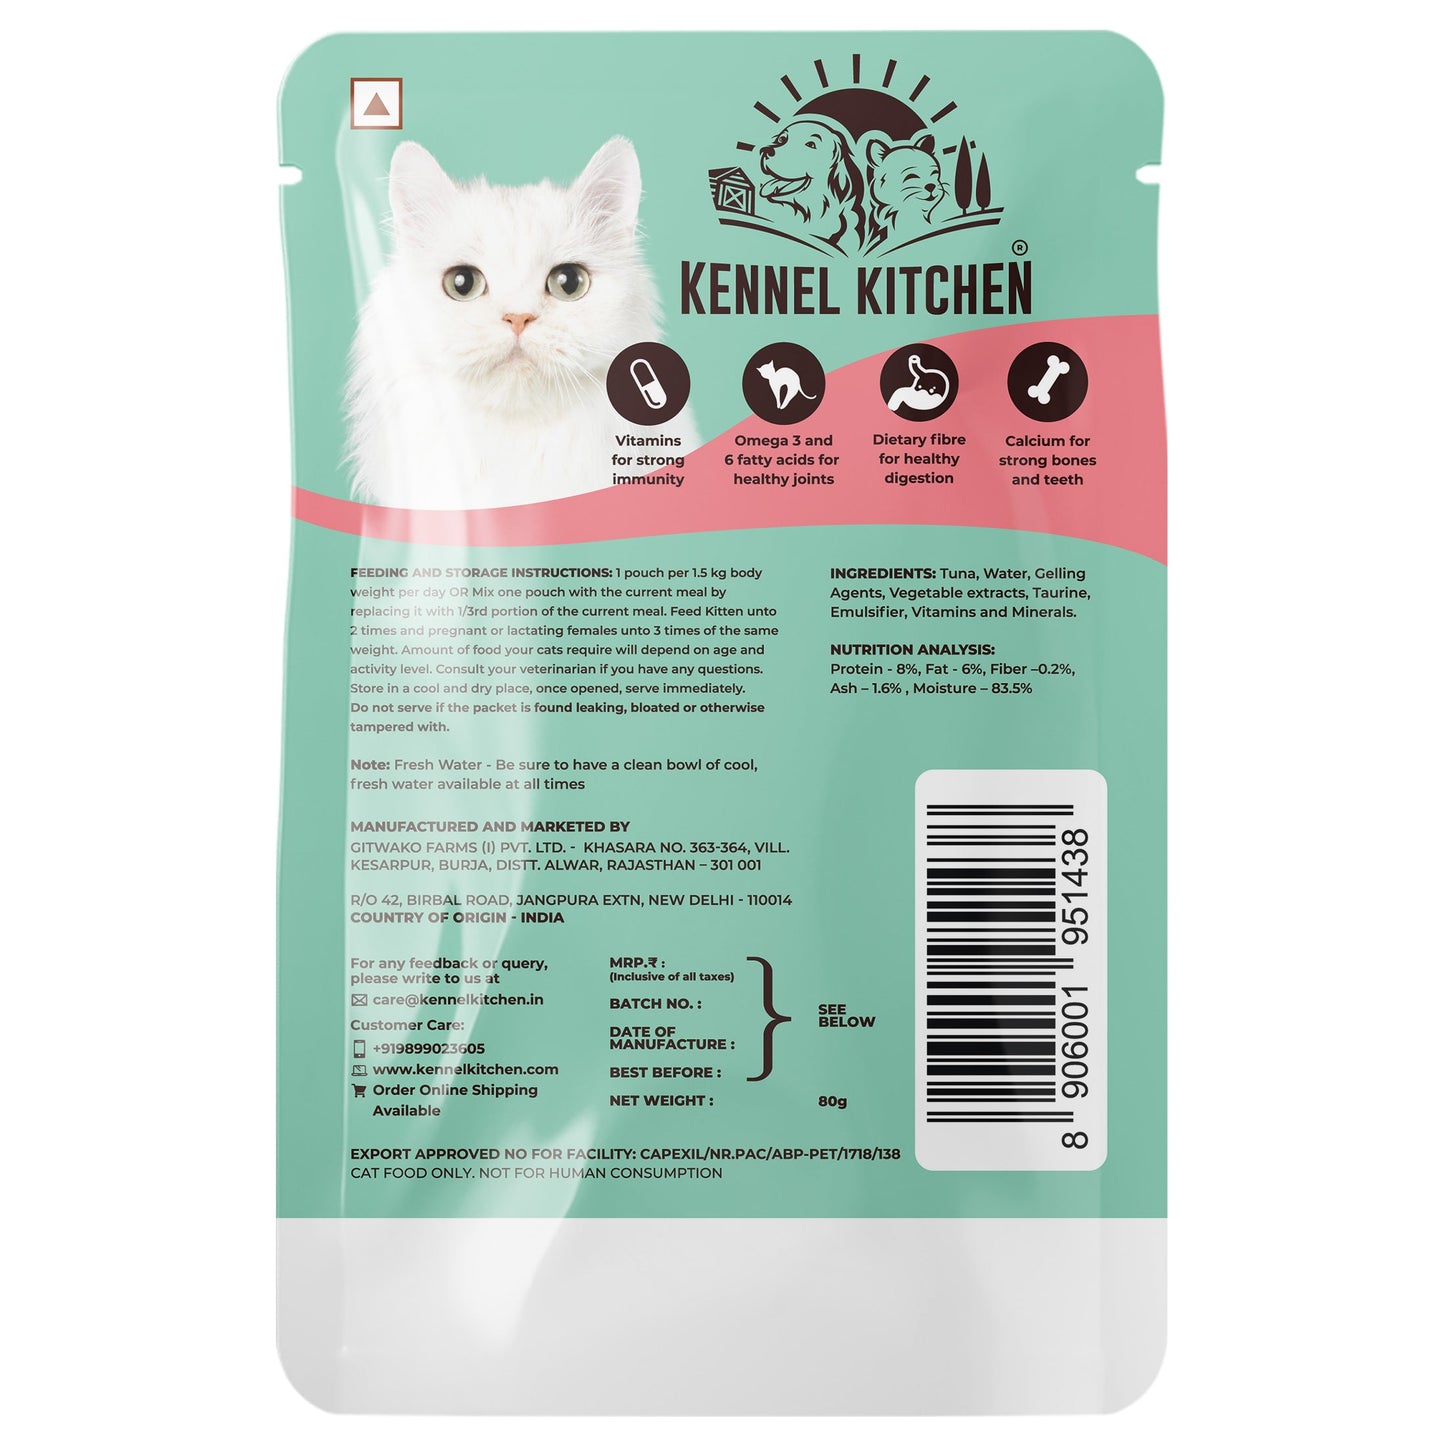 Kennel Kitchen Tuna in Jelly For Cats